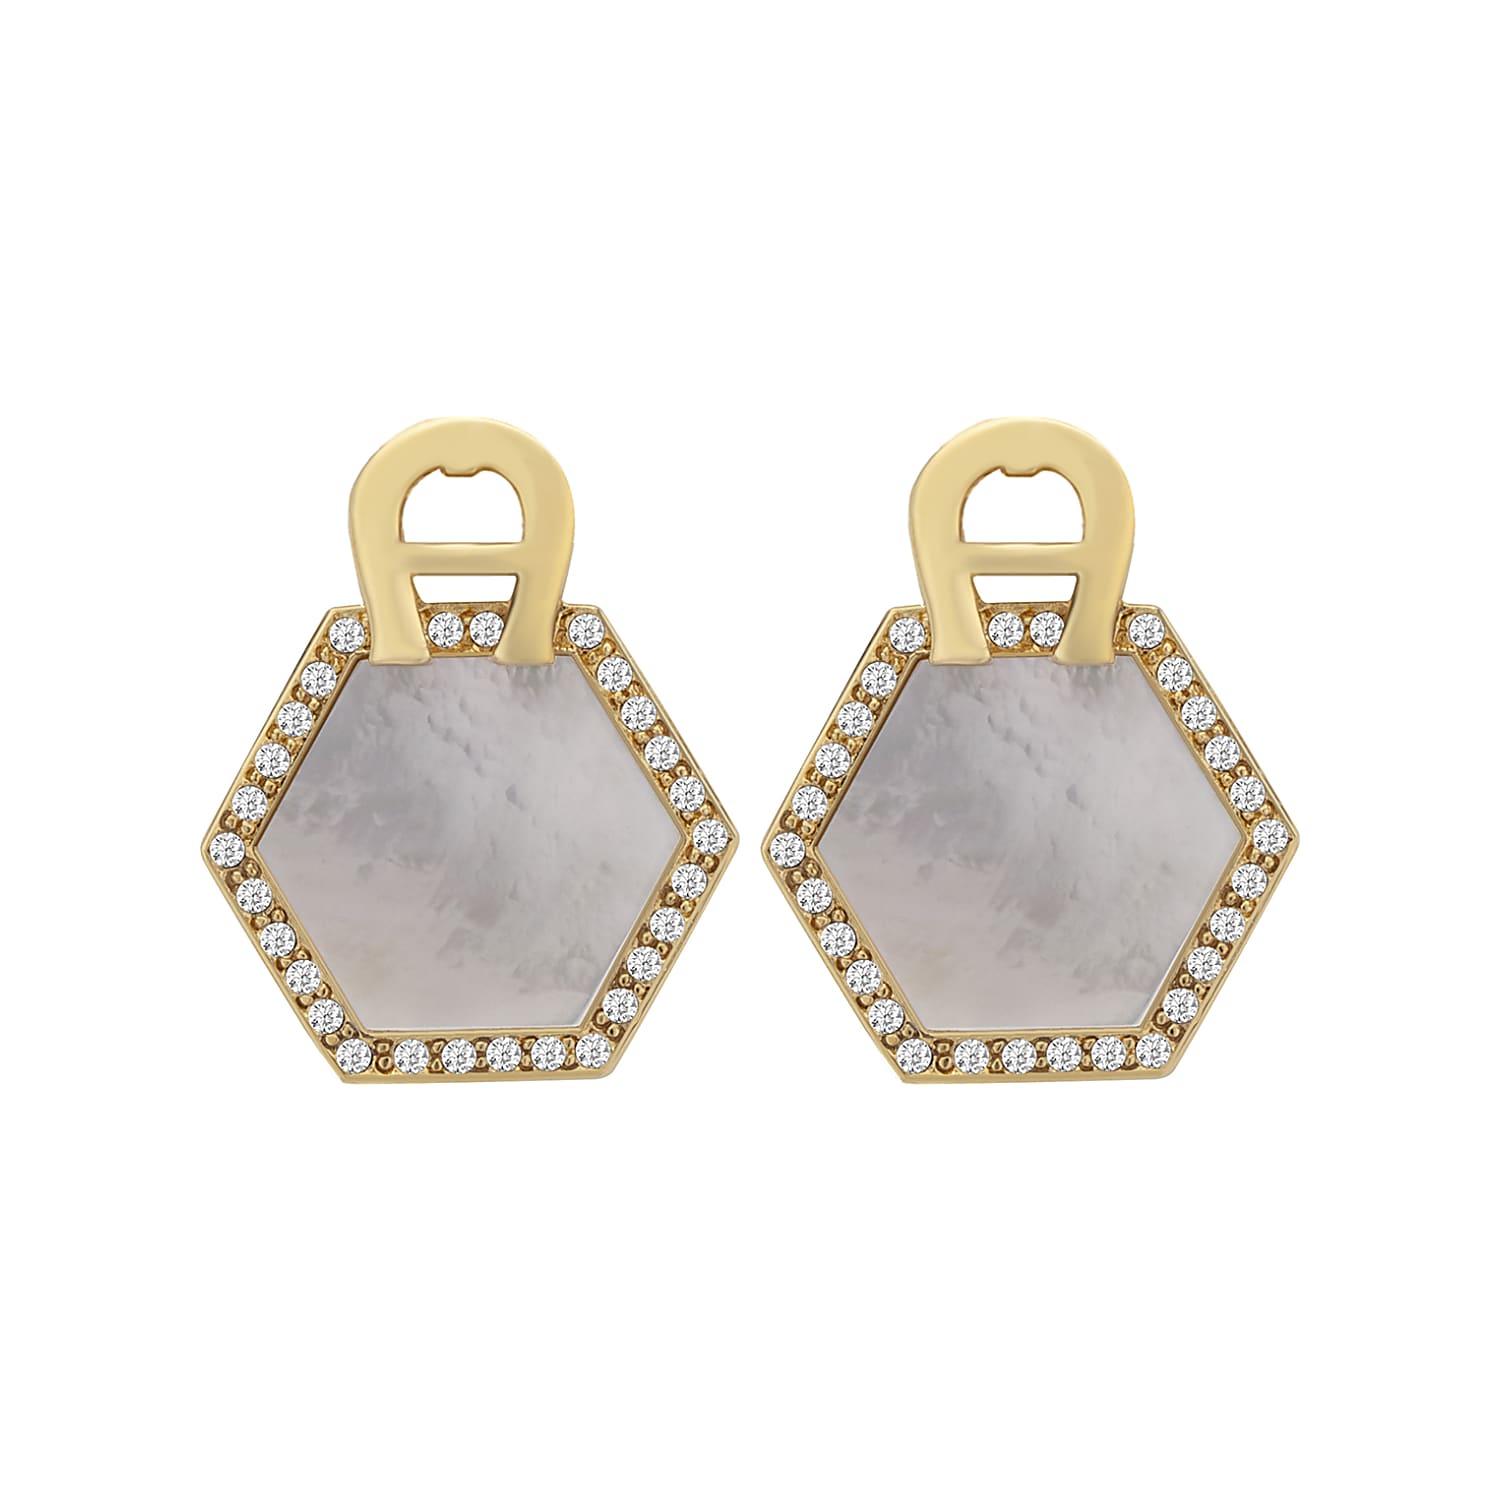 A-Logo Earrings with crystals Gold